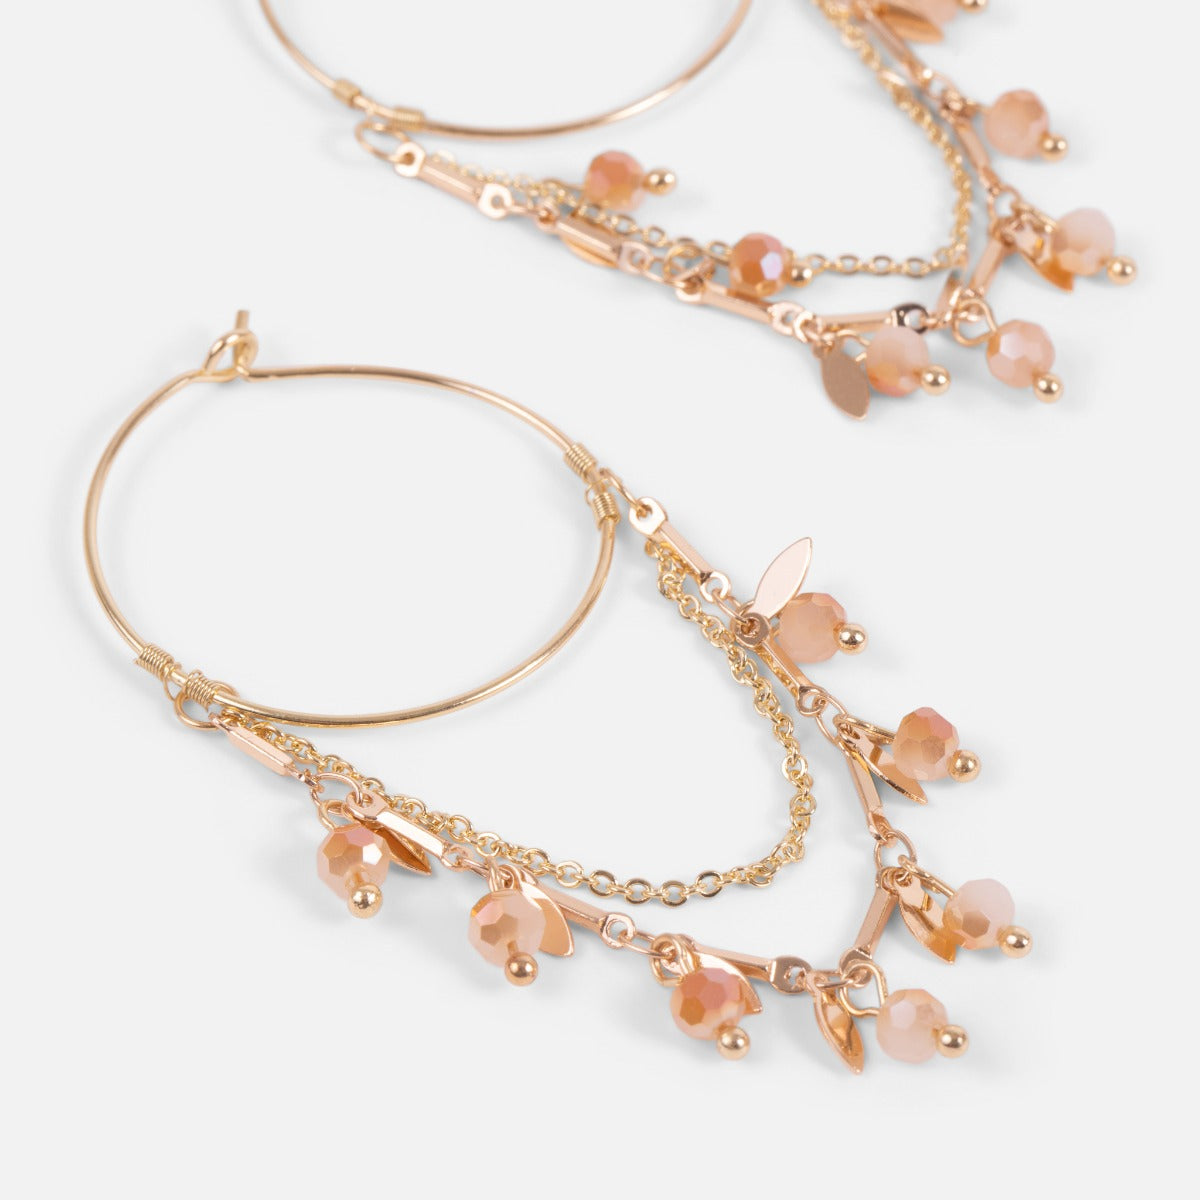 Earrings with chains and beads 